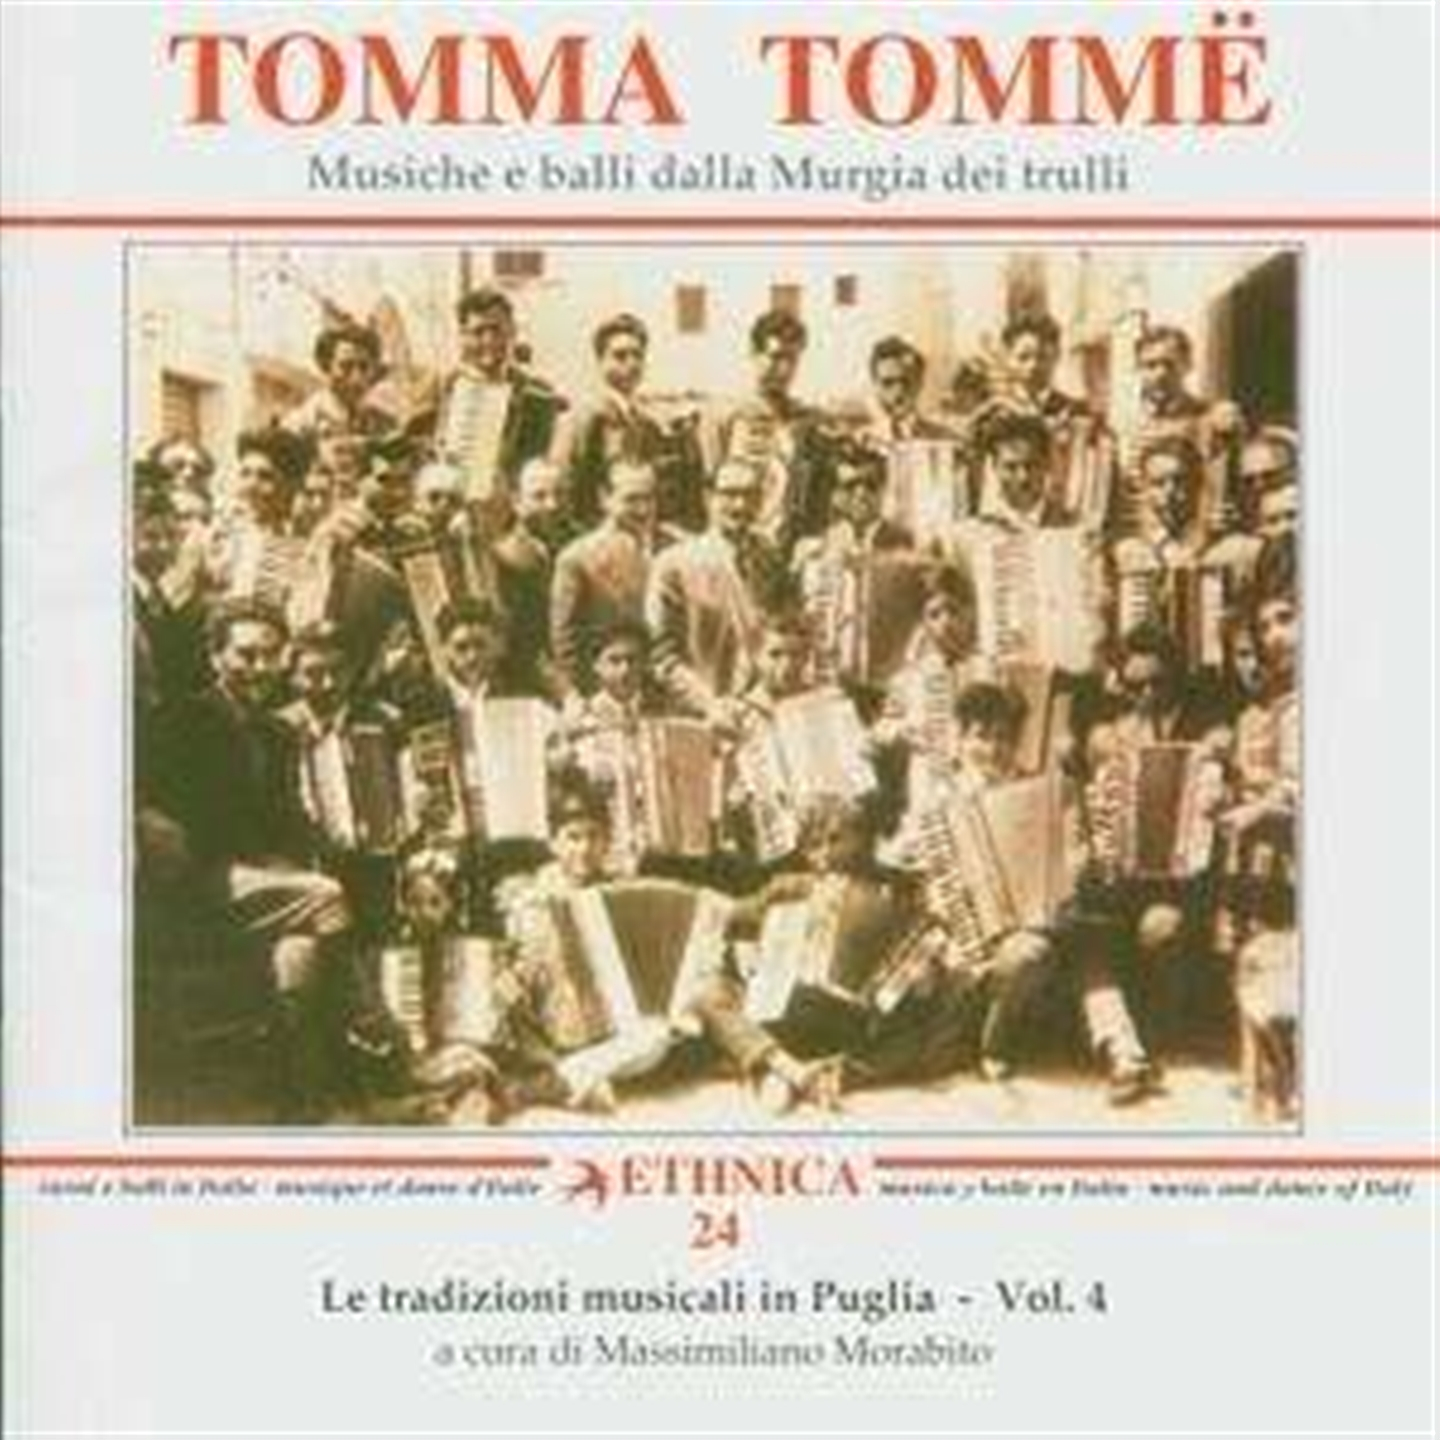 TOMMA TOMME